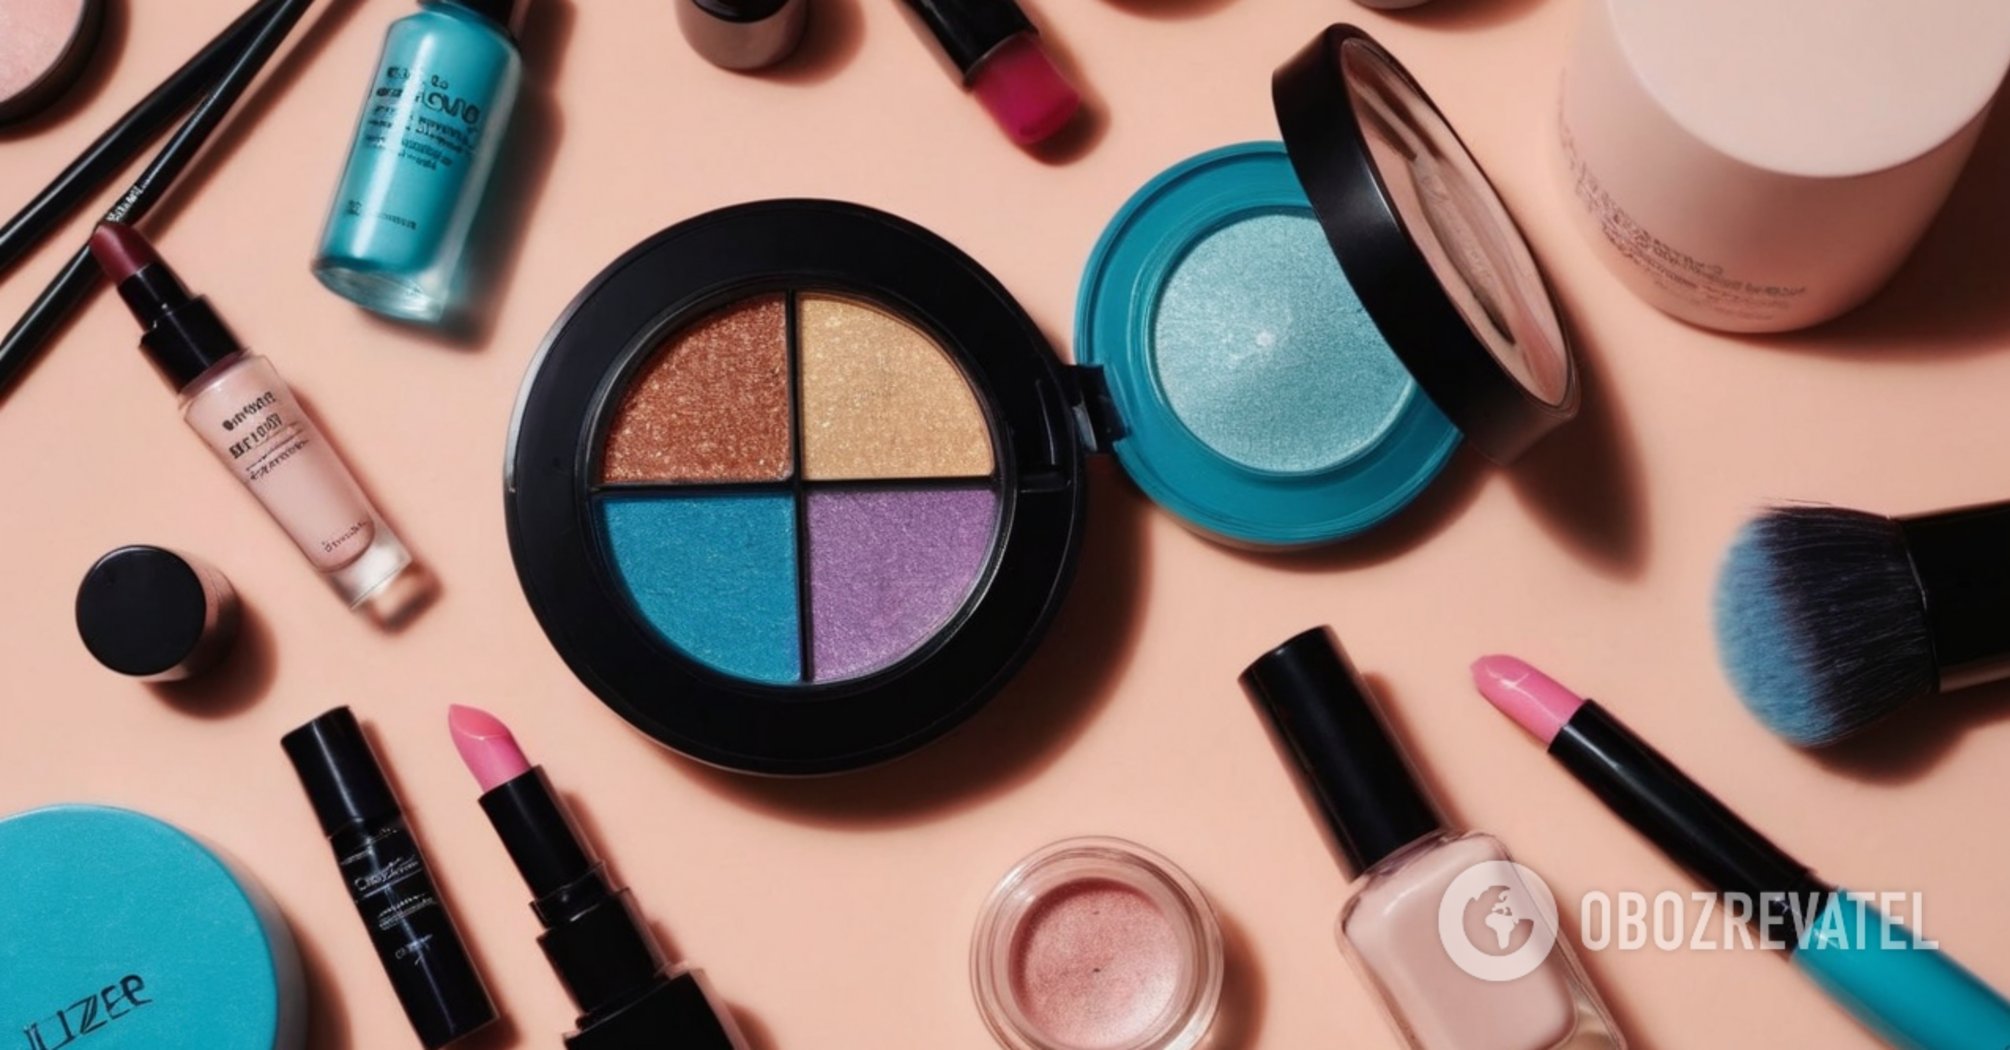 Summer makeup basics: what products are best for the heat